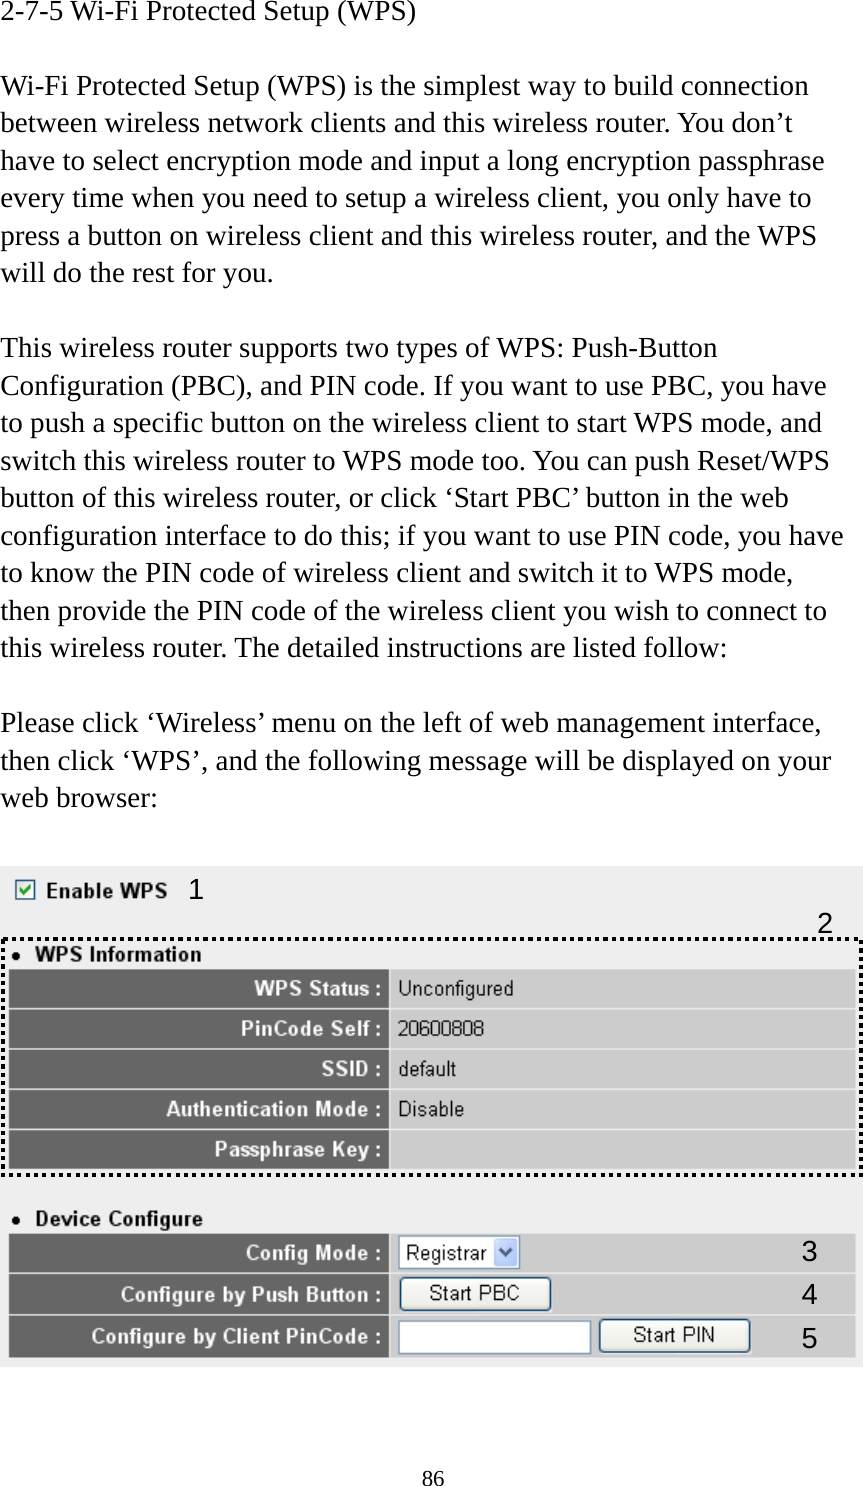 86 2-7-5 Wi-Fi Protected Setup (WPS)  Wi-Fi Protected Setup (WPS) is the simplest way to build connection between wireless network clients and this wireless router. You don’t have to select encryption mode and input a long encryption passphrase every time when you need to setup a wireless client, you only have to press a button on wireless client and this wireless router, and the WPS will do the rest for you.  This wireless router supports two types of WPS: Push-Button Configuration (PBC), and PIN code. If you want to use PBC, you have to push a specific button on the wireless client to start WPS mode, and switch this wireless router to WPS mode too. You can push Reset/WPS button of this wireless router, or click ‘Start PBC’ button in the web configuration interface to do this; if you want to use PIN code, you have to know the PIN code of wireless client and switch it to WPS mode, then provide the PIN code of the wireless client you wish to connect to this wireless router. The detailed instructions are listed follow:  Please click ‘Wireless’ menu on the left of web management interface, then click ‘WPS’, and the following message will be displayed on your web browser:    1 34 25 